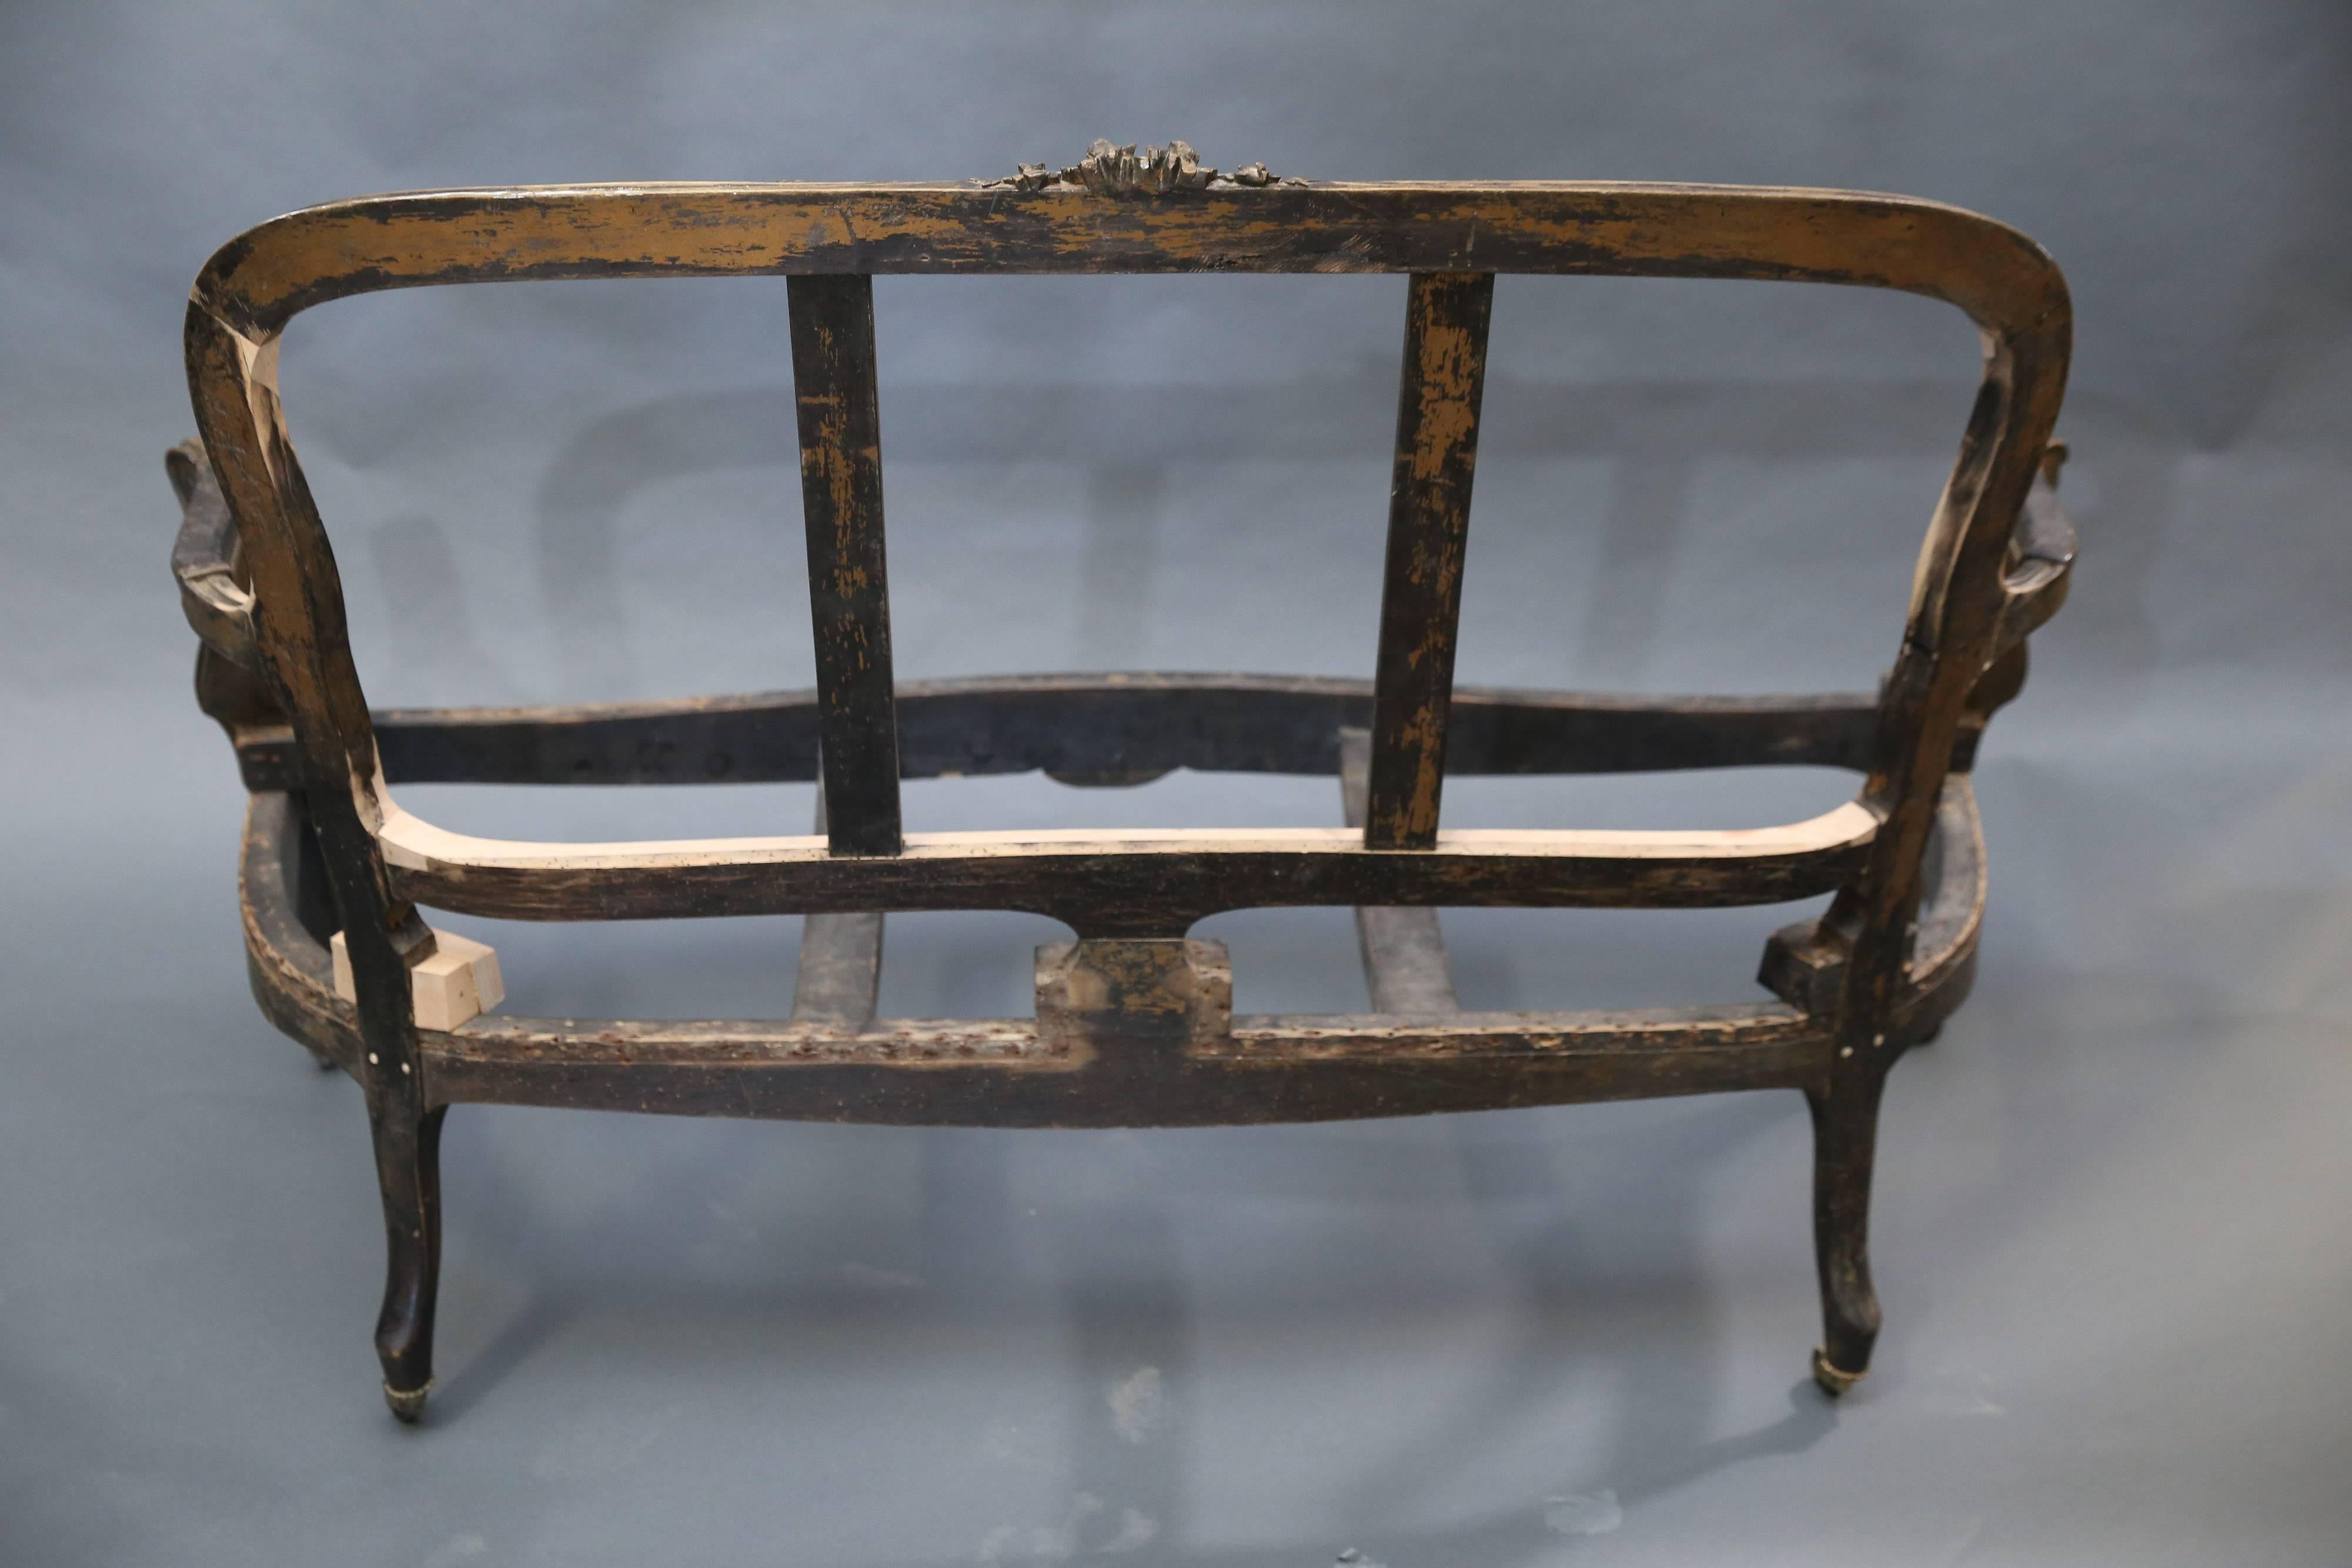 18th Century 19th Century Settee Frame with Original Paint Ready for Reupholstering